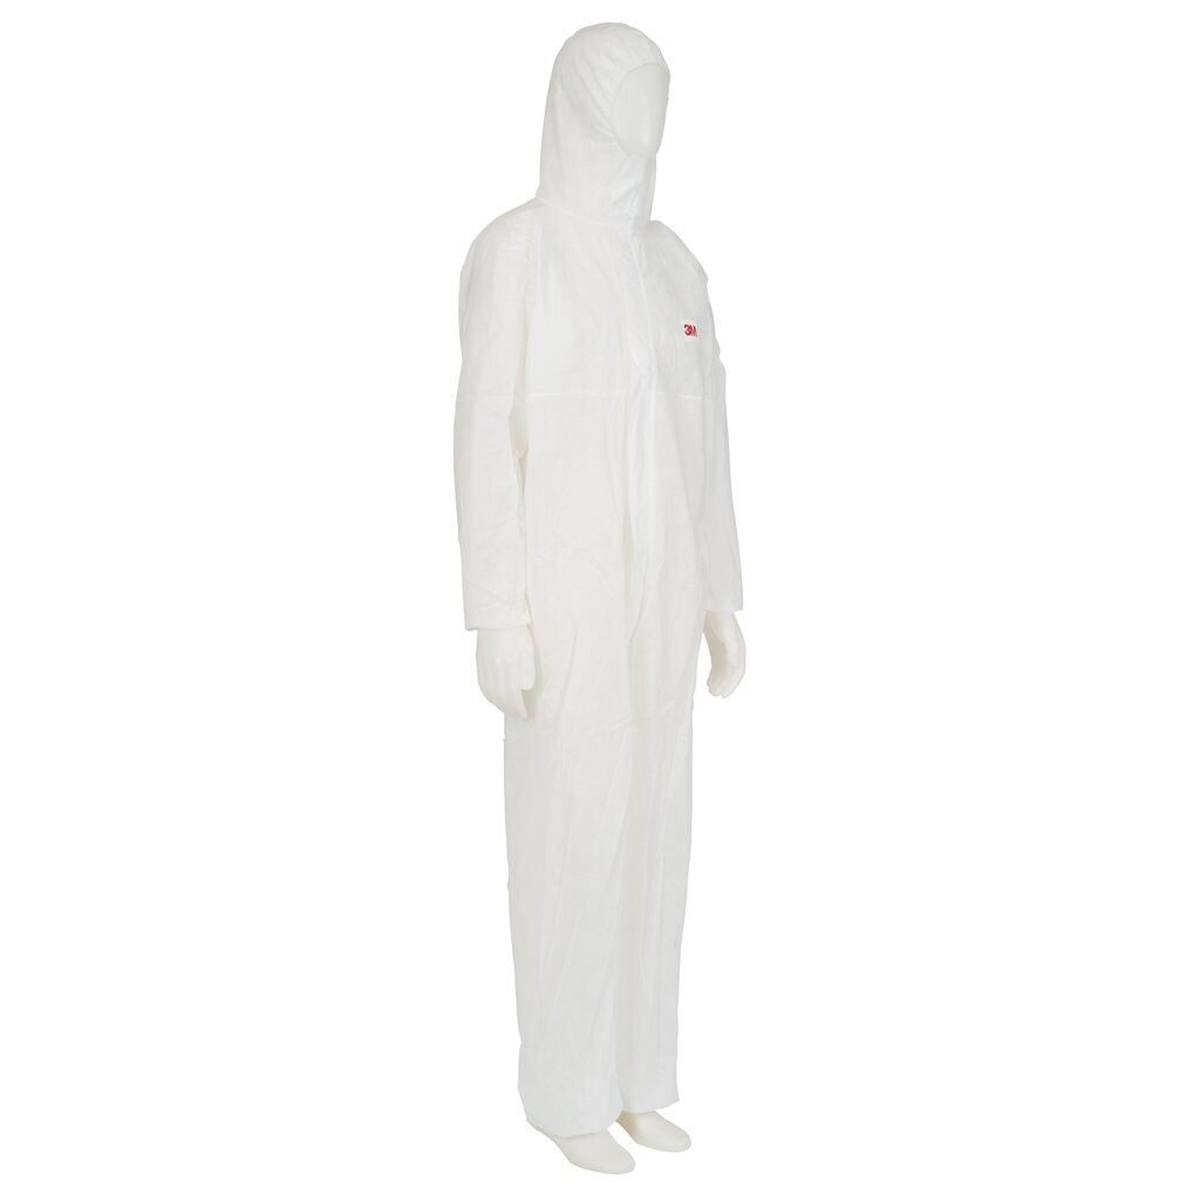 3M 4500 W Protective suit, white, CE, size M, material polypropylene, elasticated cuffs